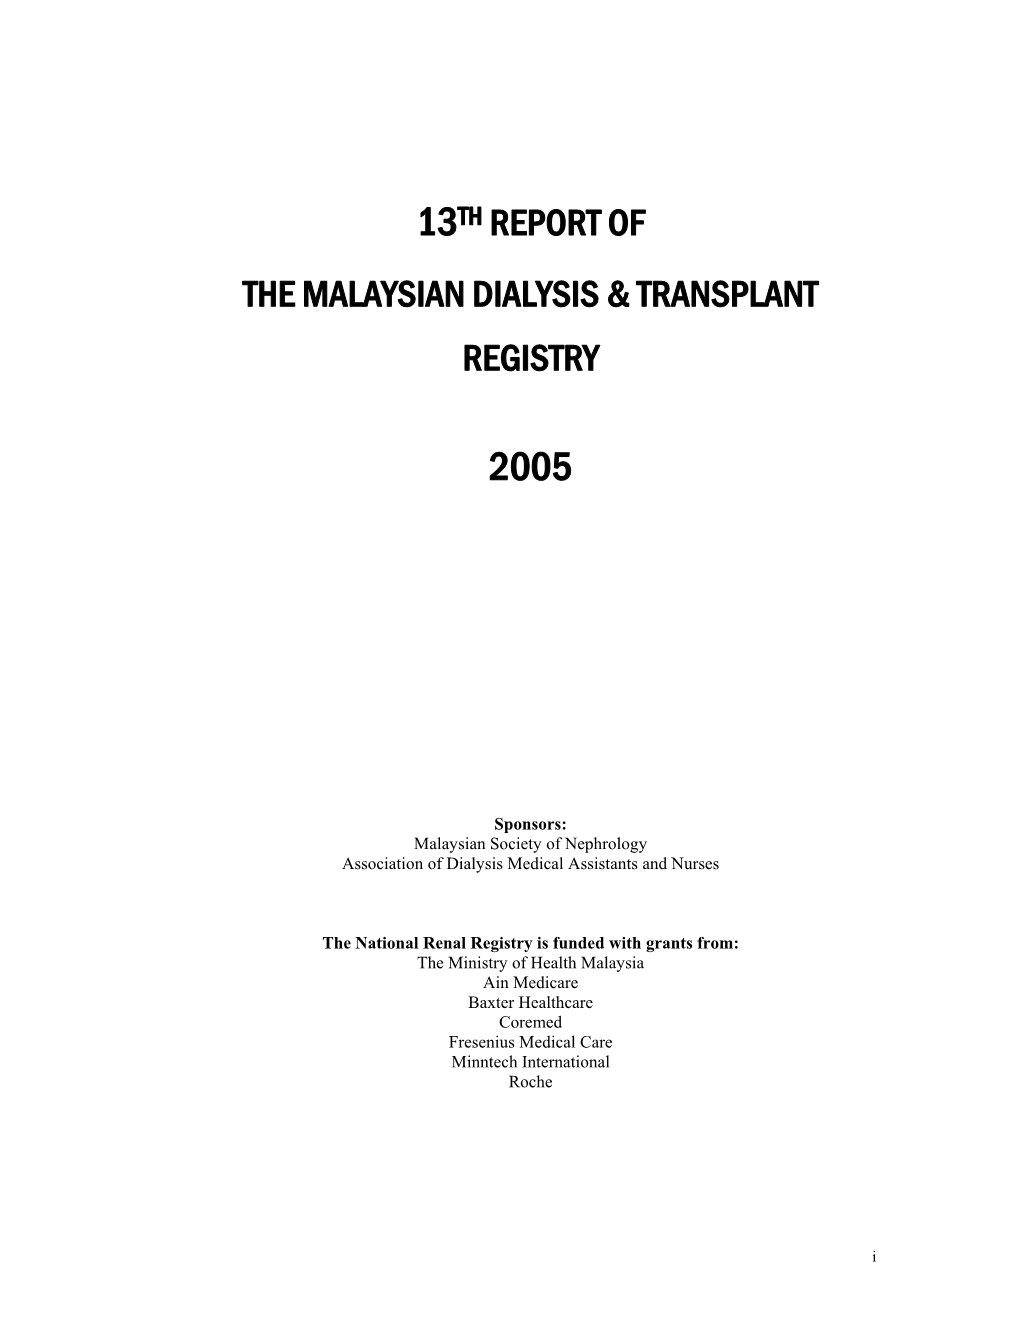 13Th Report of the Malaysian Dialysis & Transplant Registry